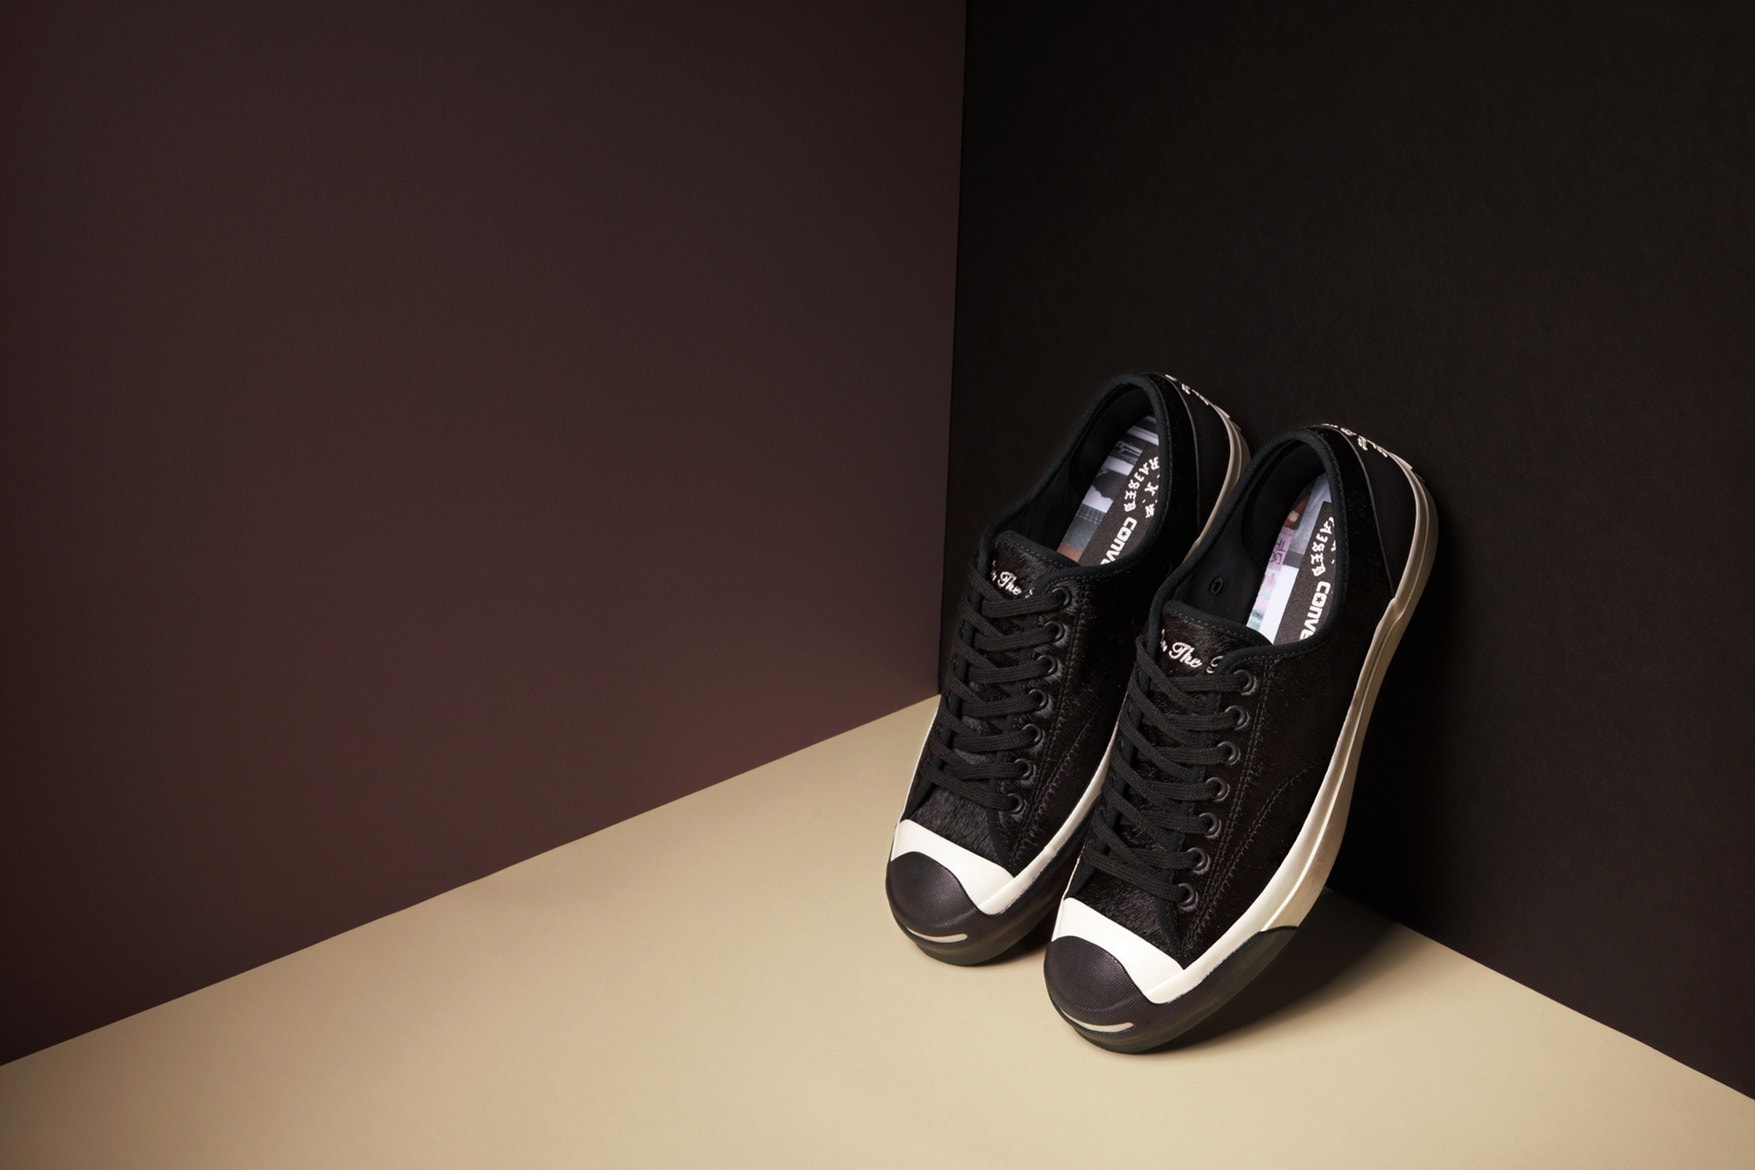 BornxRaised x Converse Jack Purcell「On The Turf」聯名系列